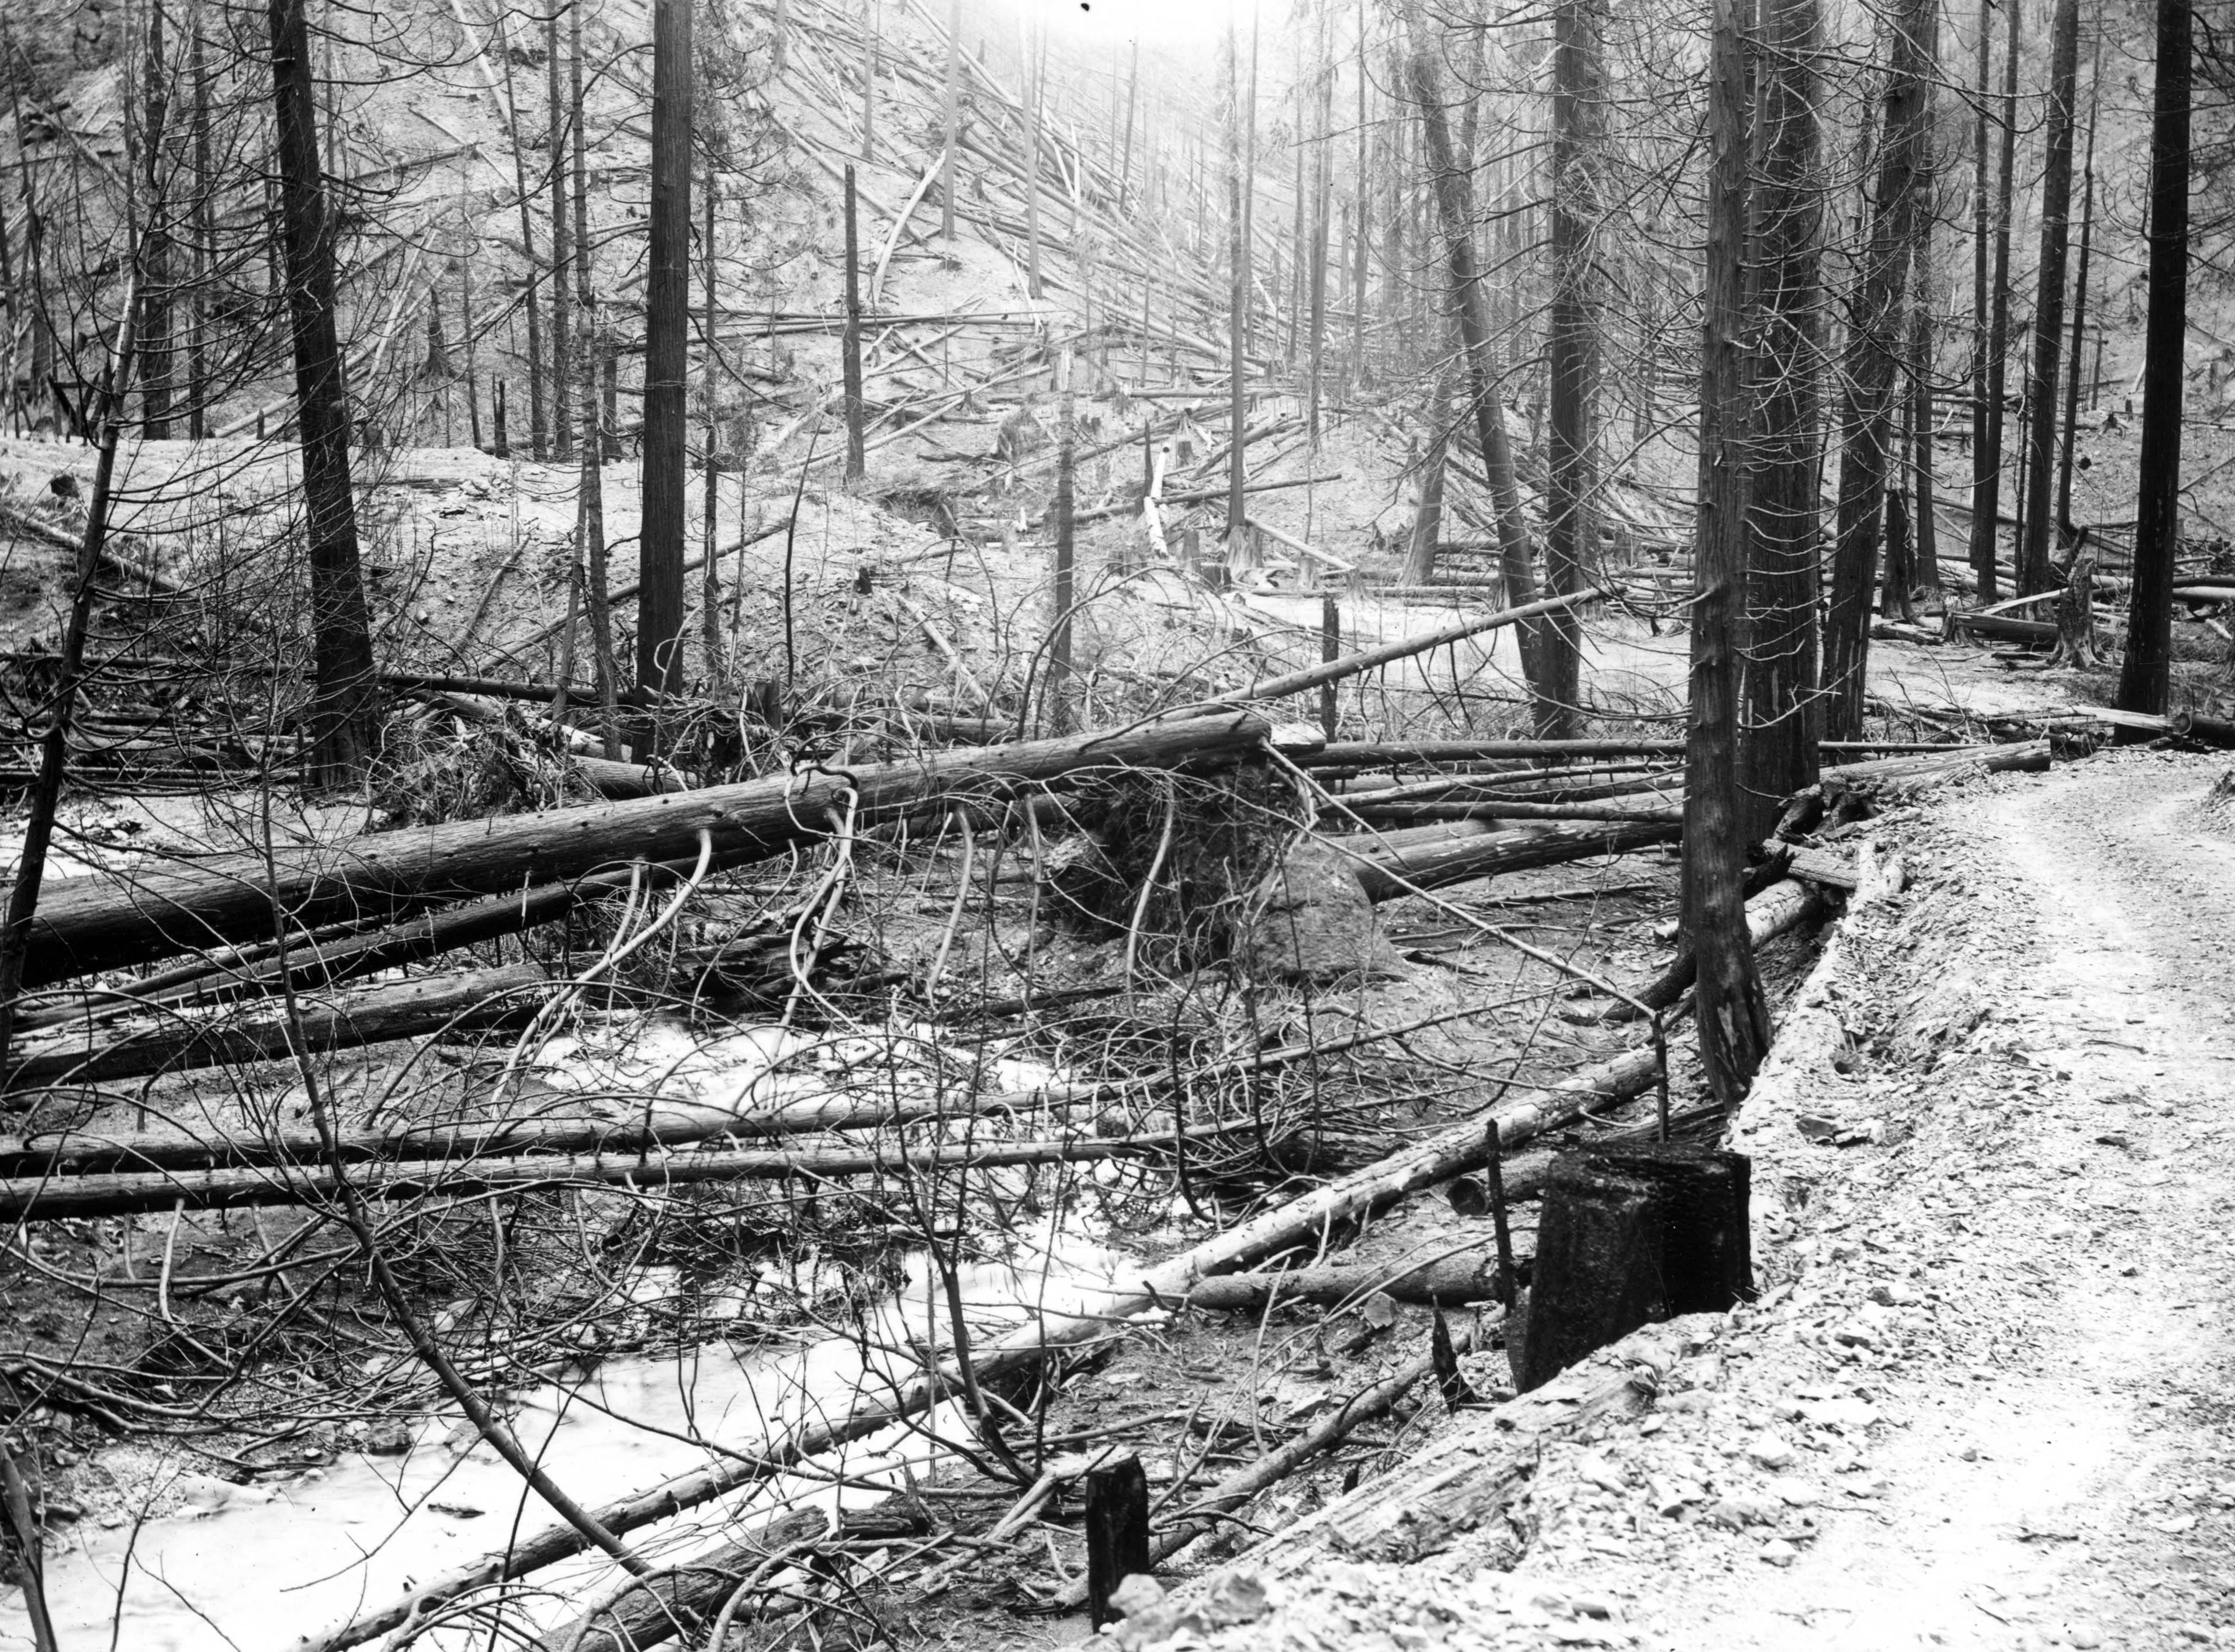 Forest Fire 1910 - Wallace [1910] Placer Creek after the fire.
